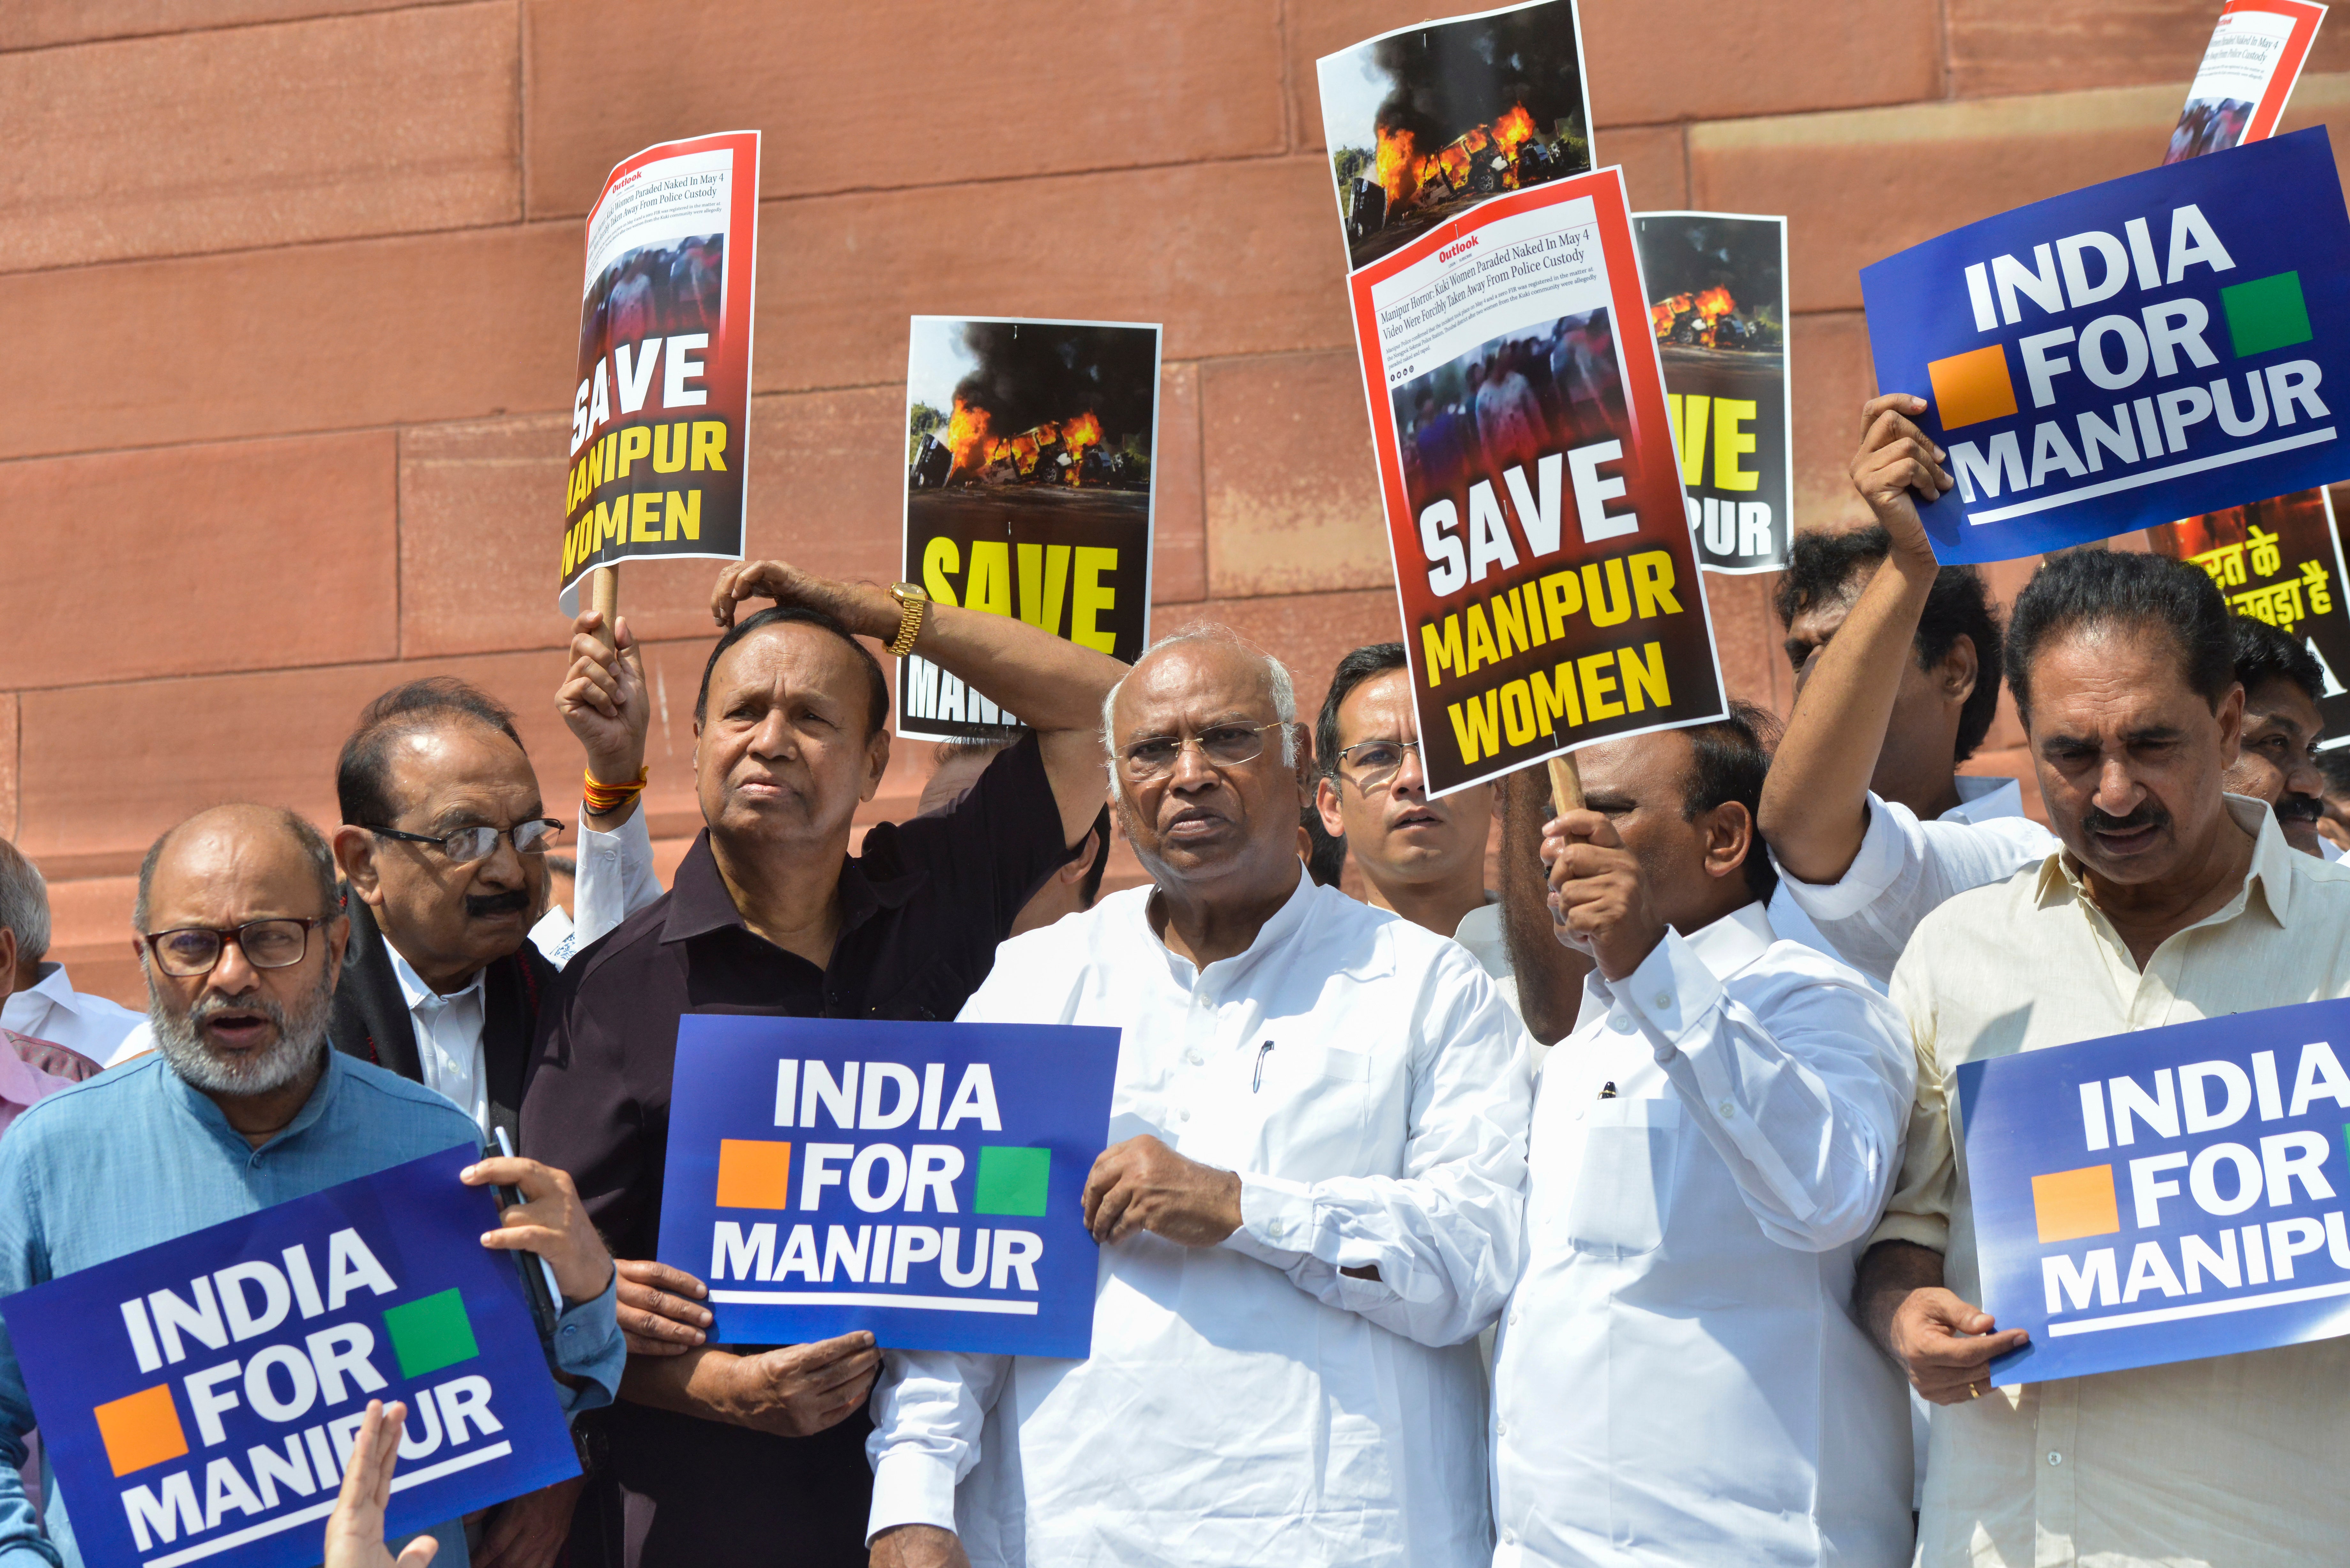 File photo: Opposition lawmakers demanding a statement from Prime Minister Narendra Modi on the violence in Manipur state carry placards outside the Parliament building in New Delhi on 24 July